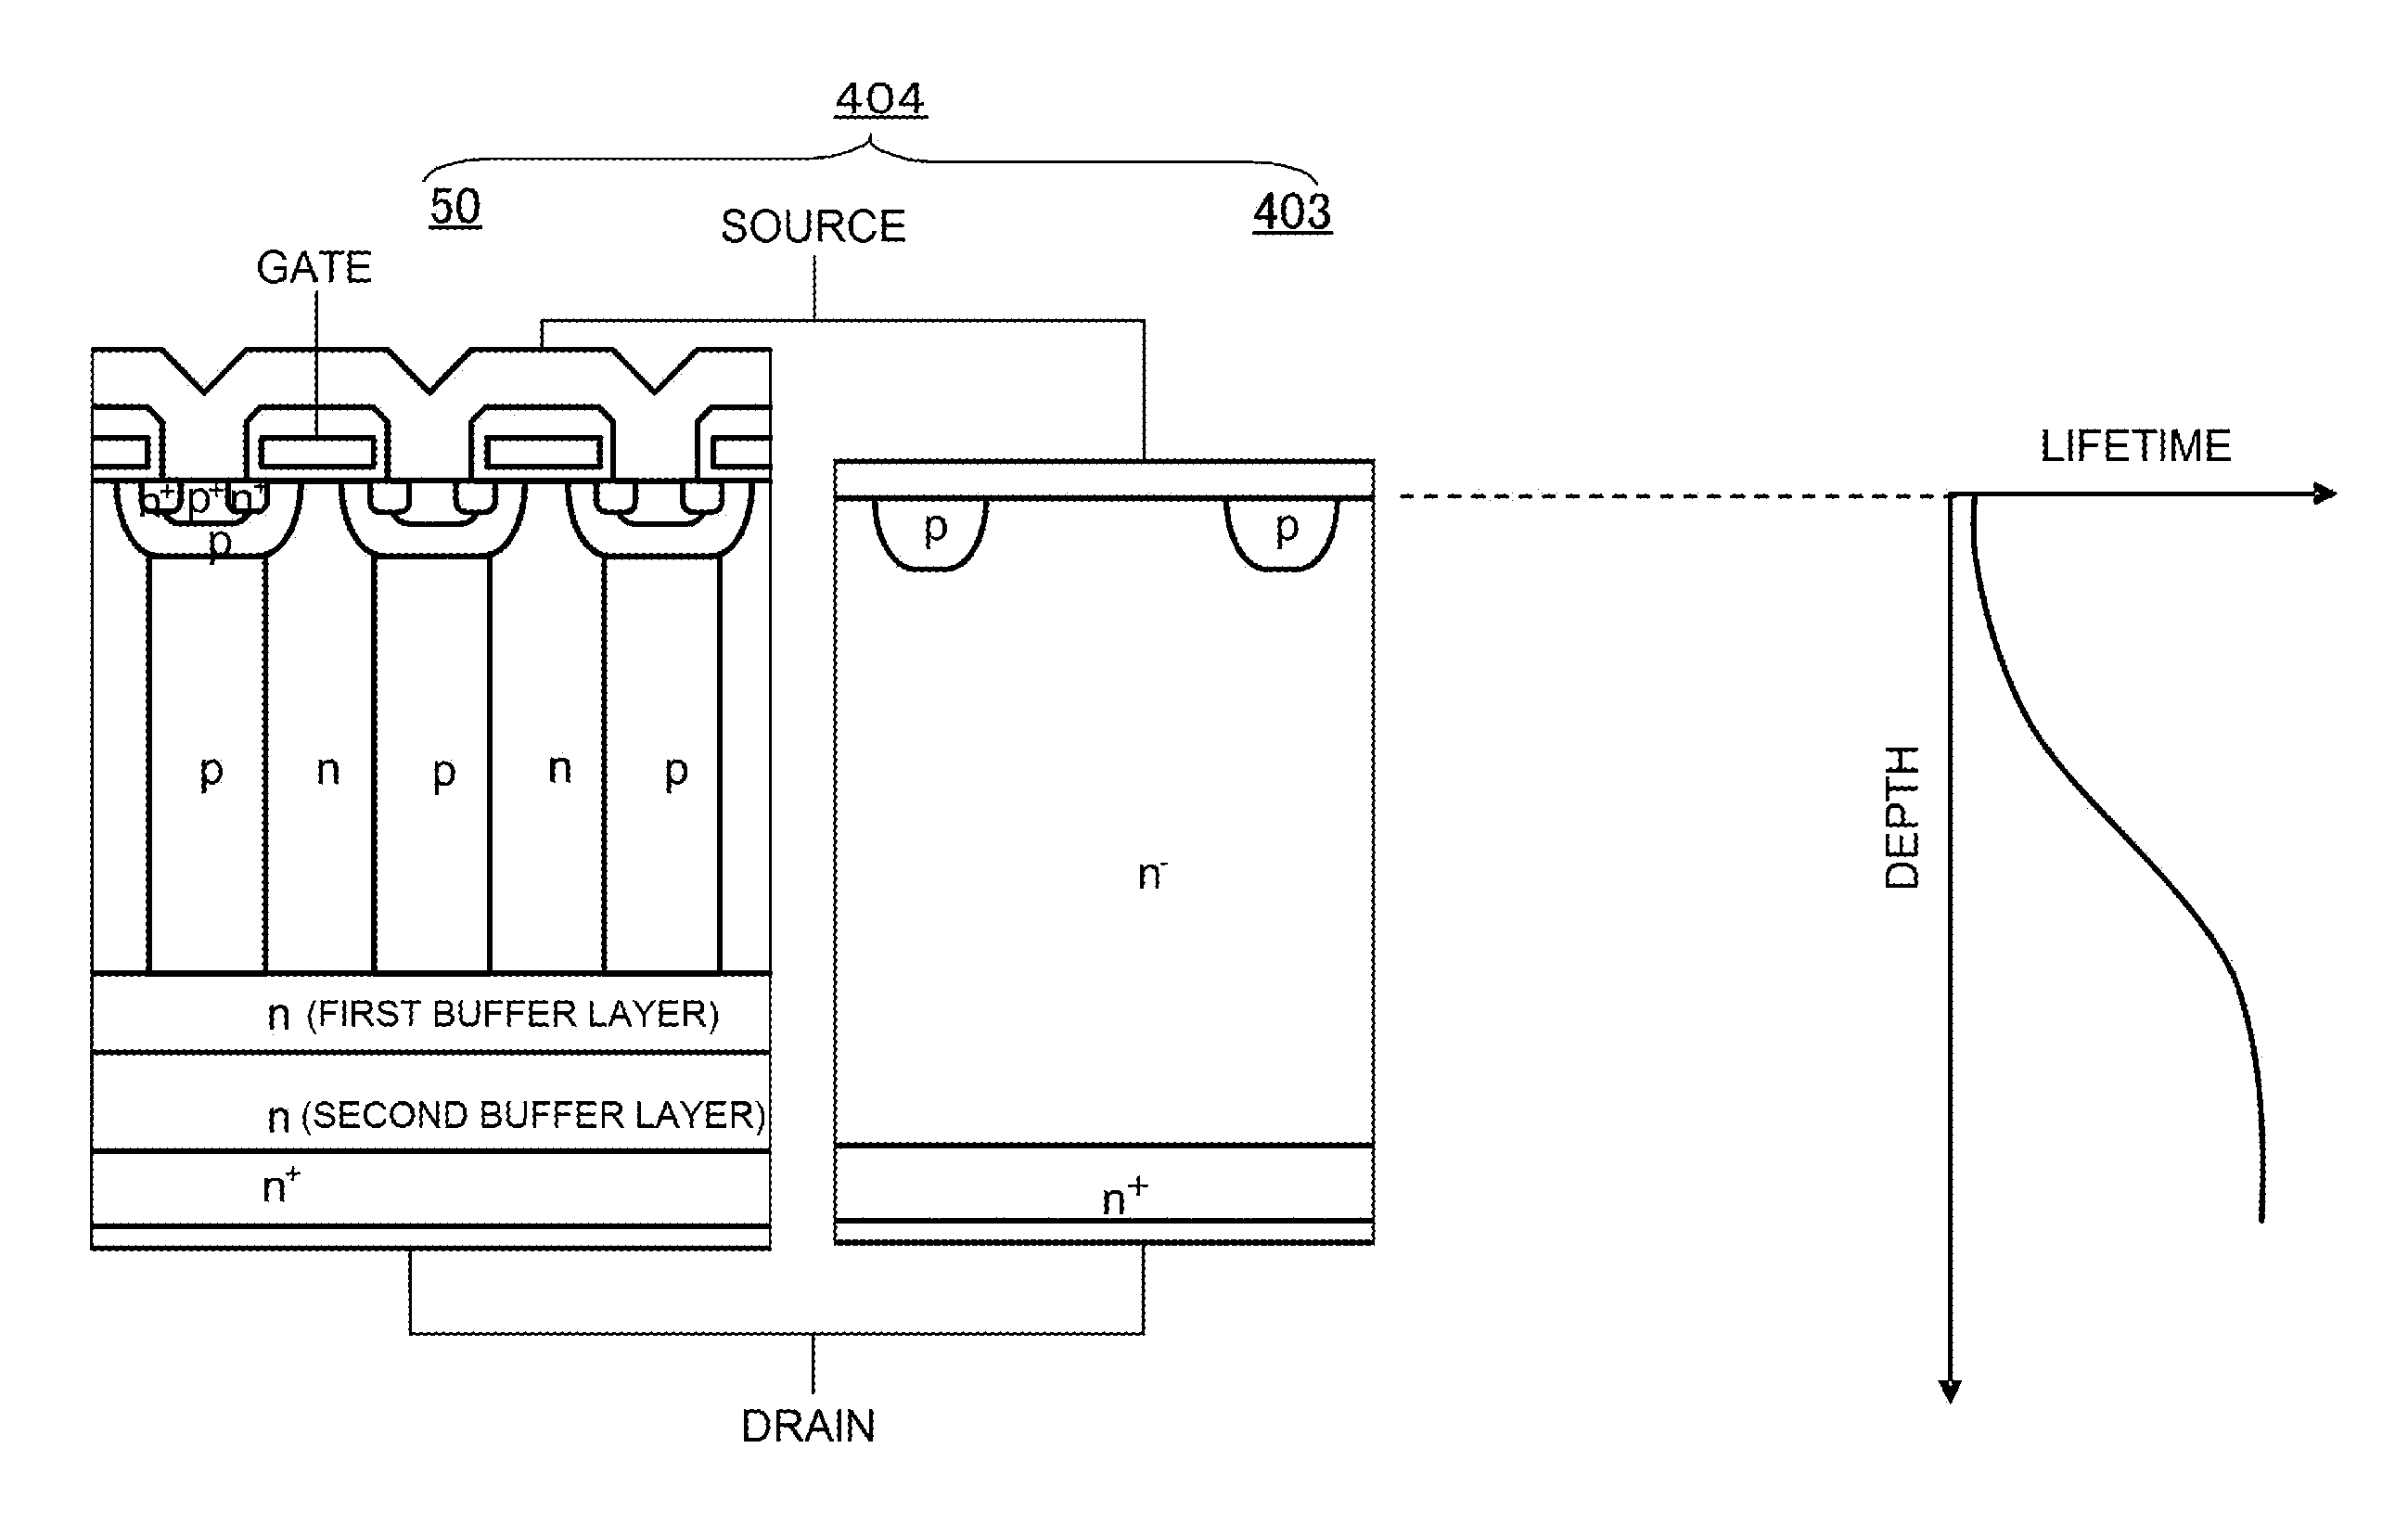 Super junction mosfet, method of manufacturing the same, and complex semiconductor device